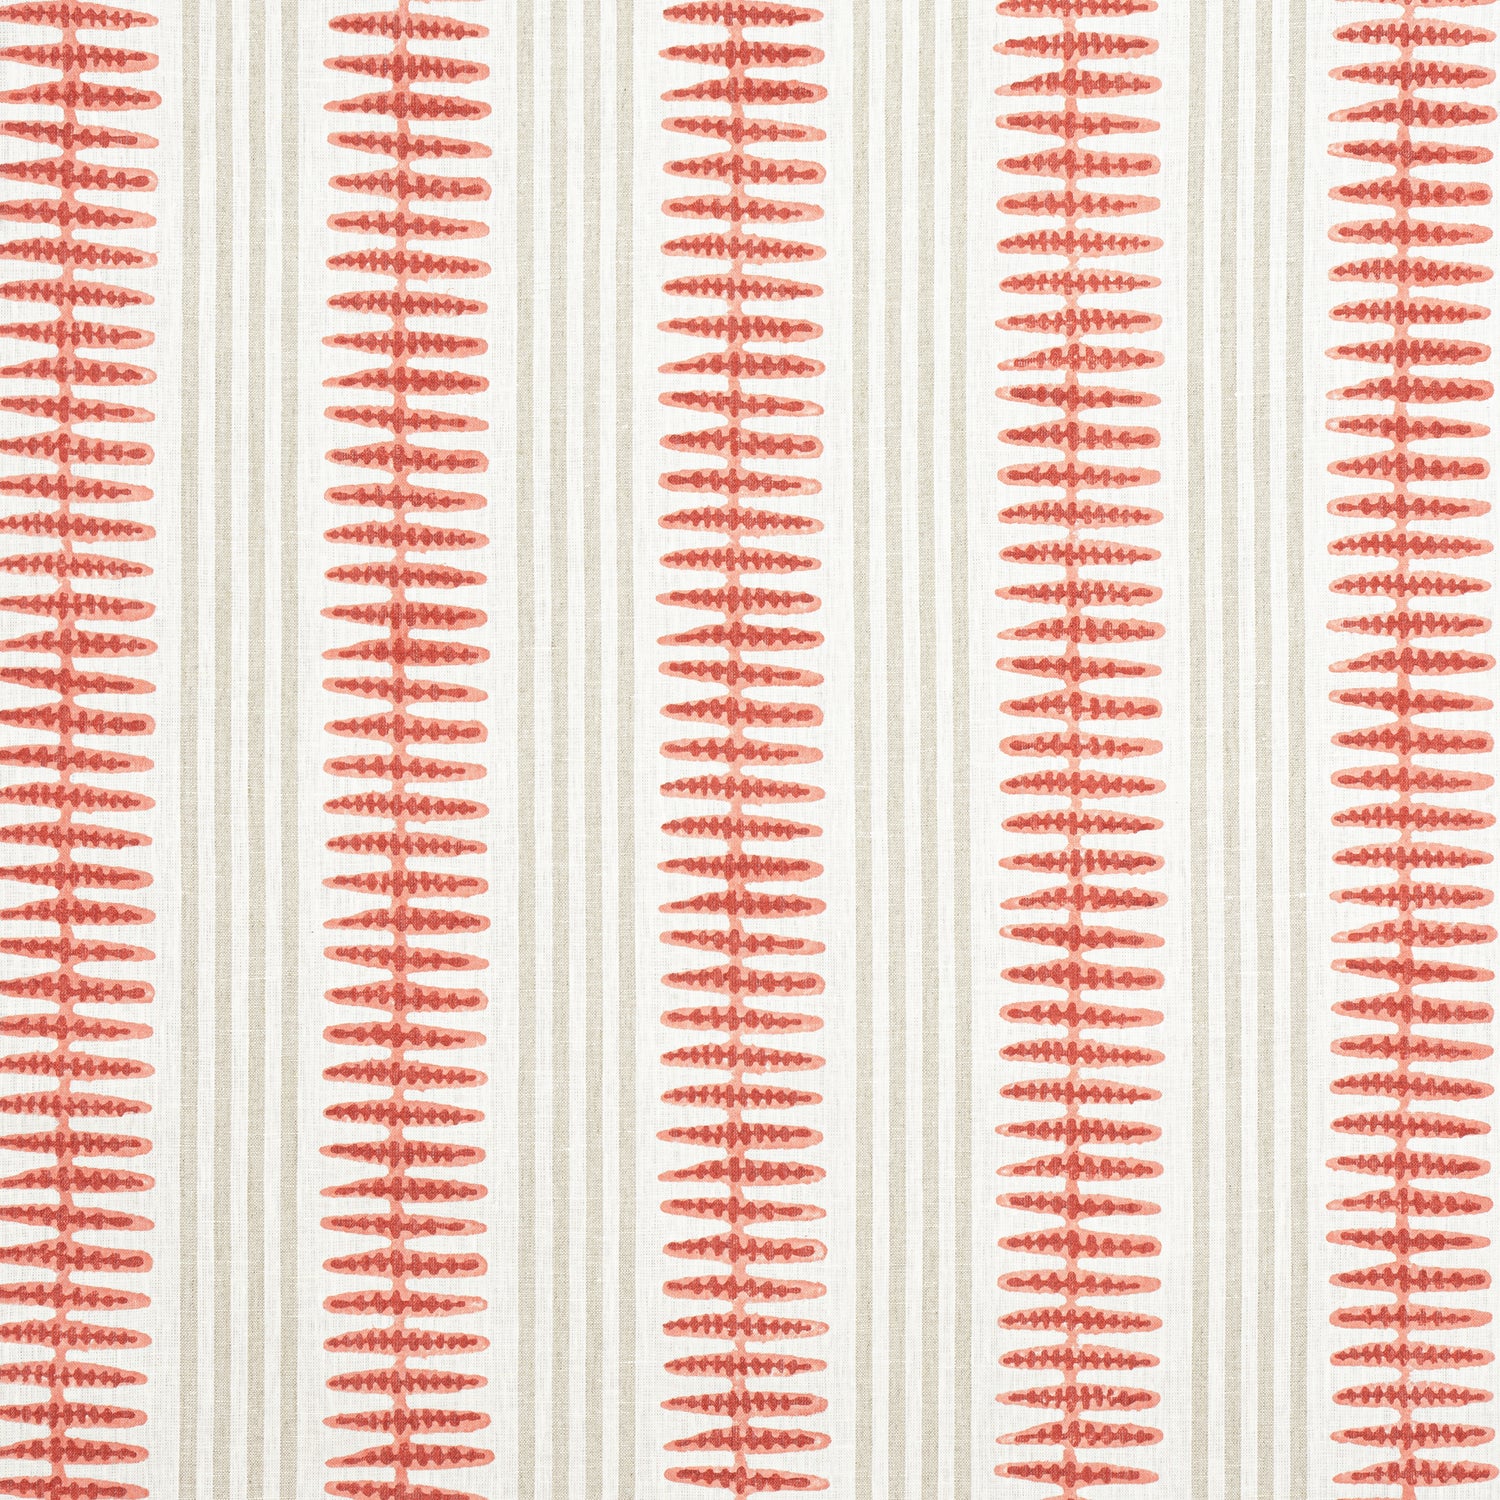 Indo Stripe fabric in sunbaked color - pattern number F981319 - by Thibaut in the Montecito collection